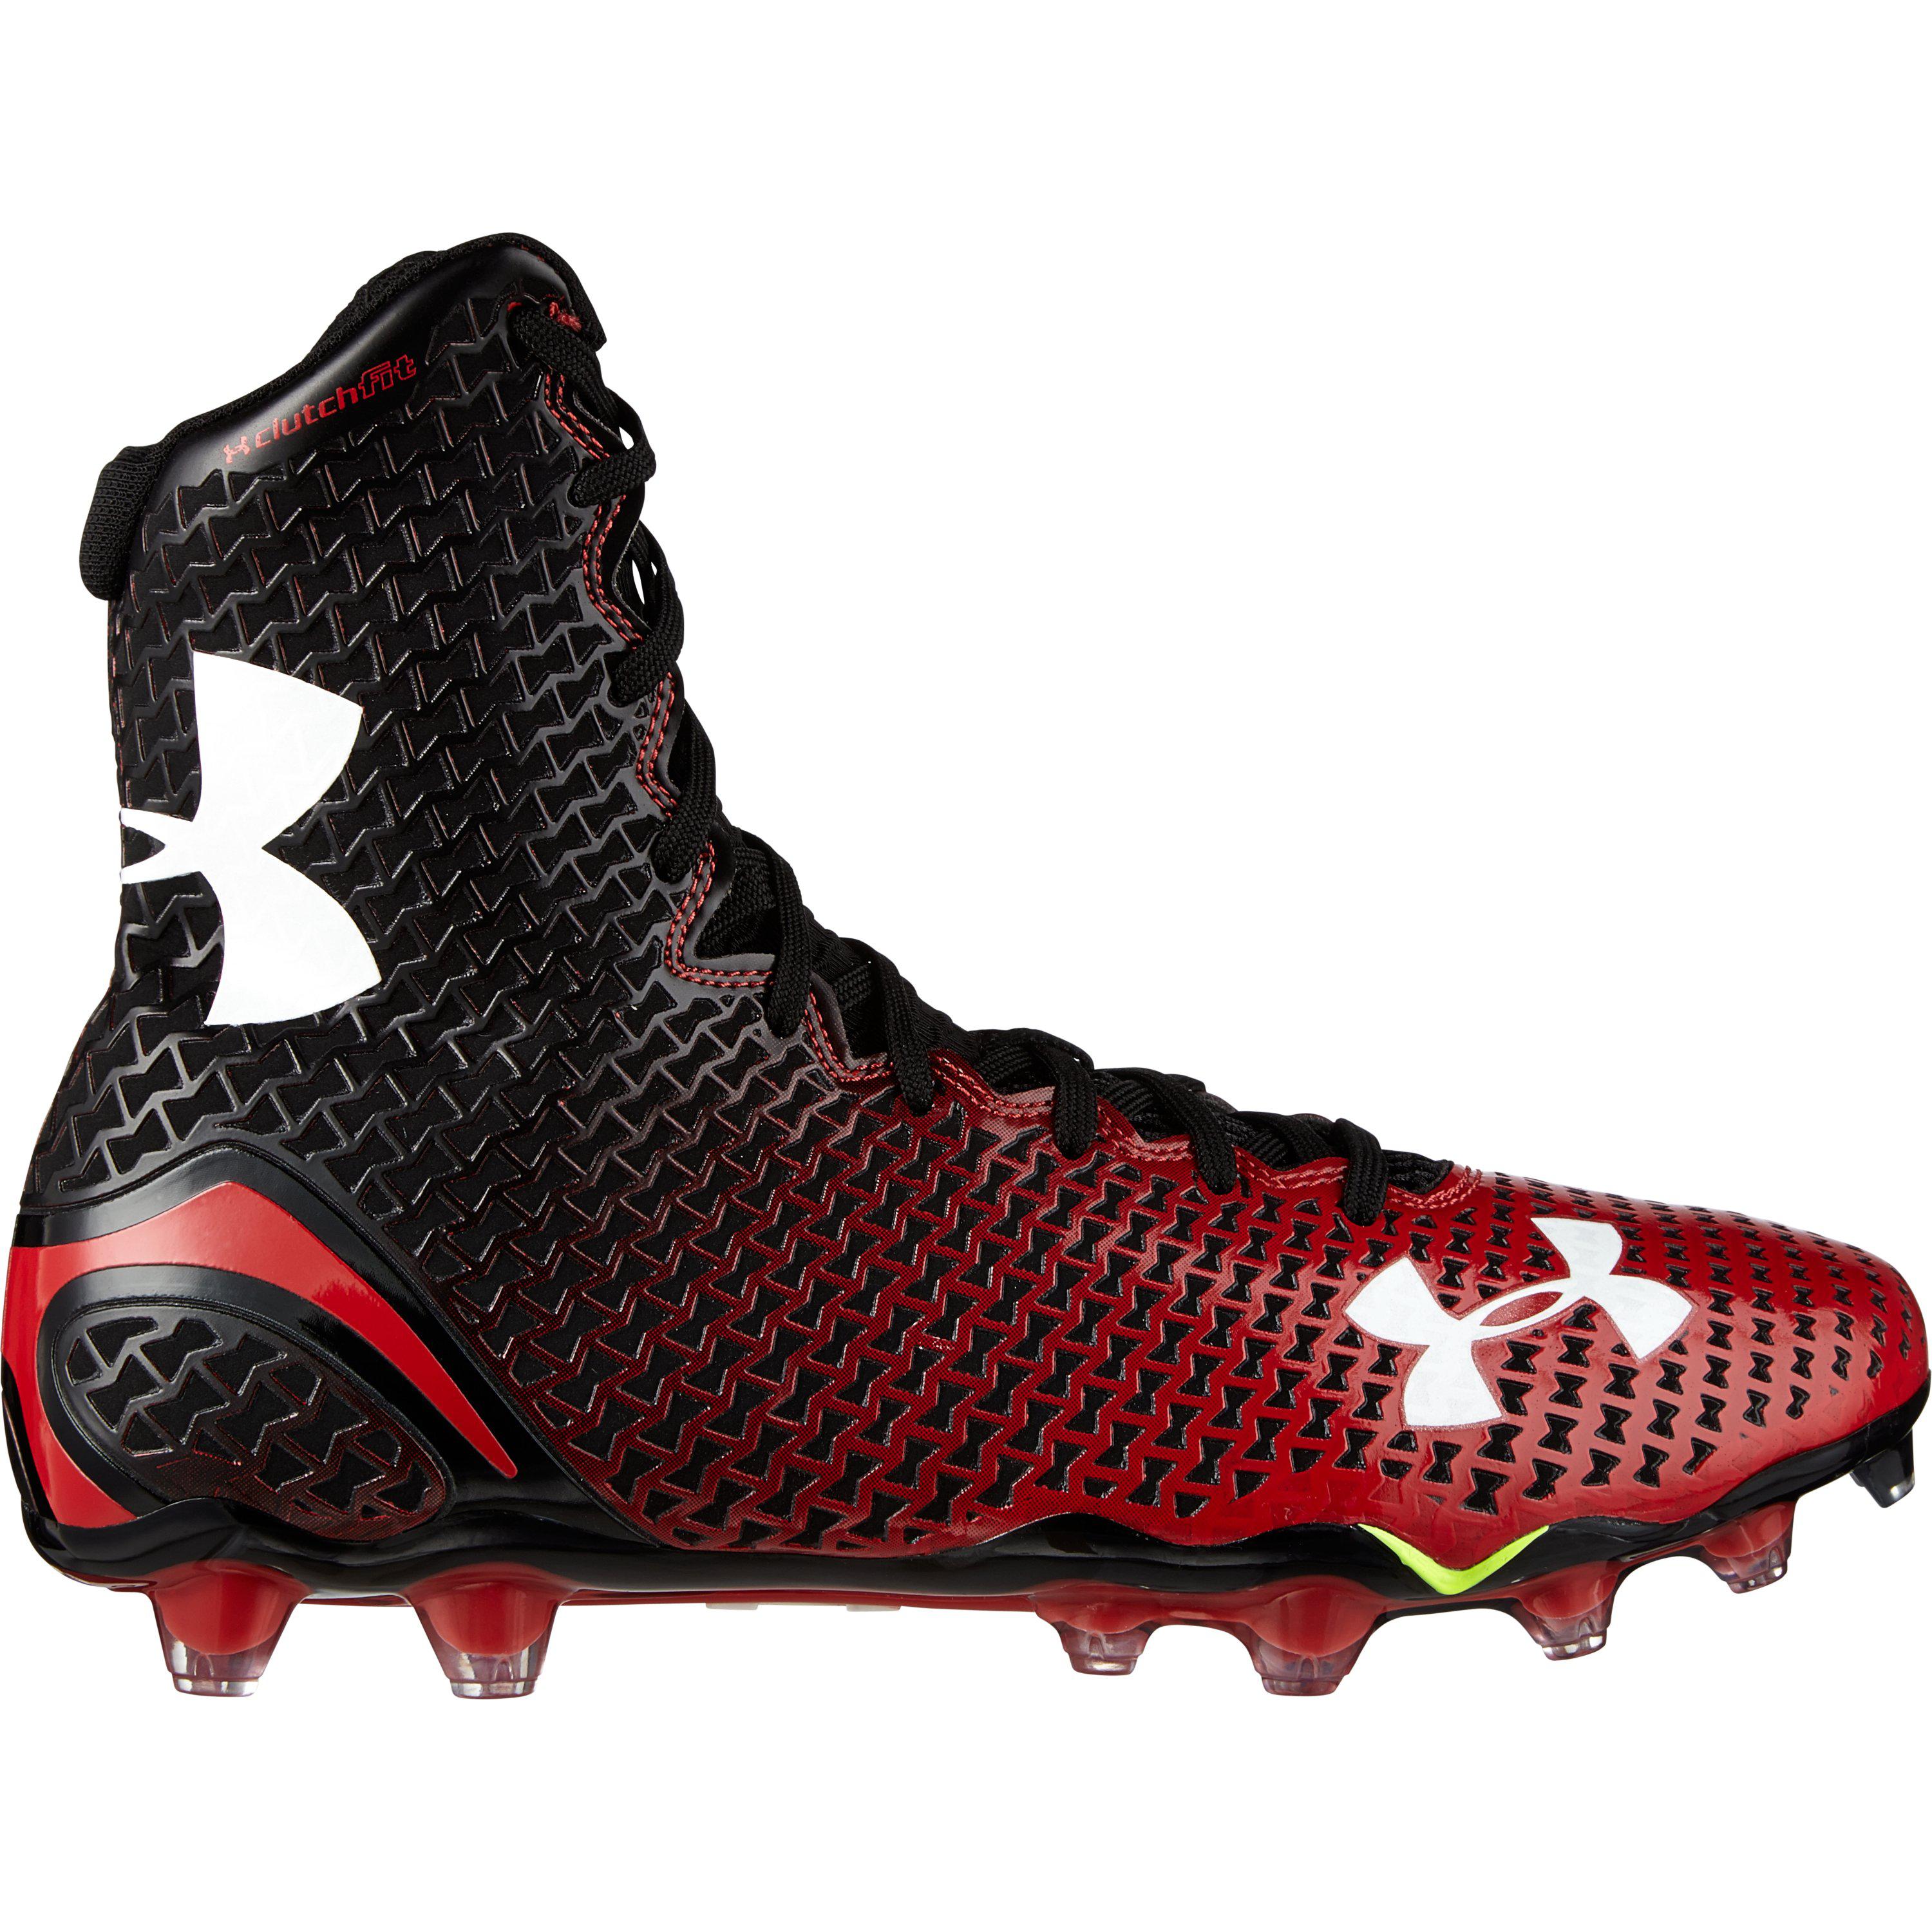 NEW Under Armour Highlight 1289779-011 Black White Football Cleat Size 